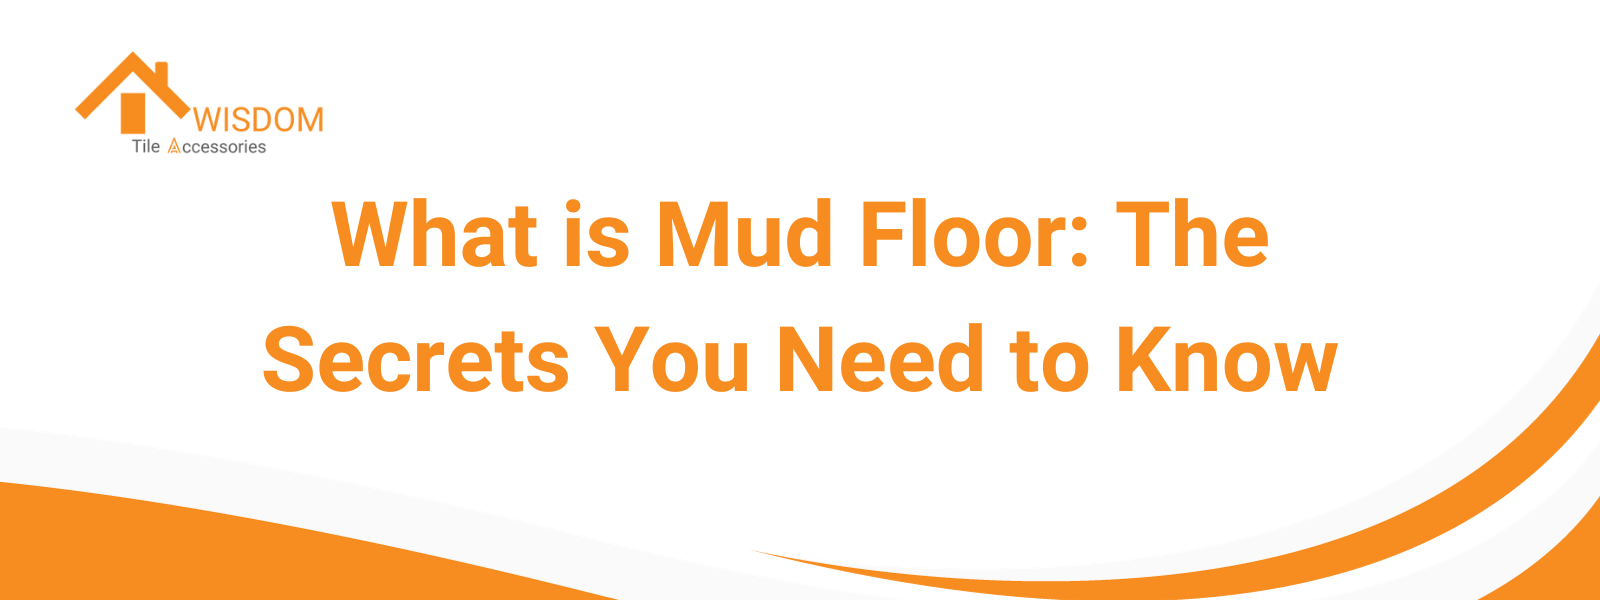 What is Mud Floor: The Secrets You Need to Know